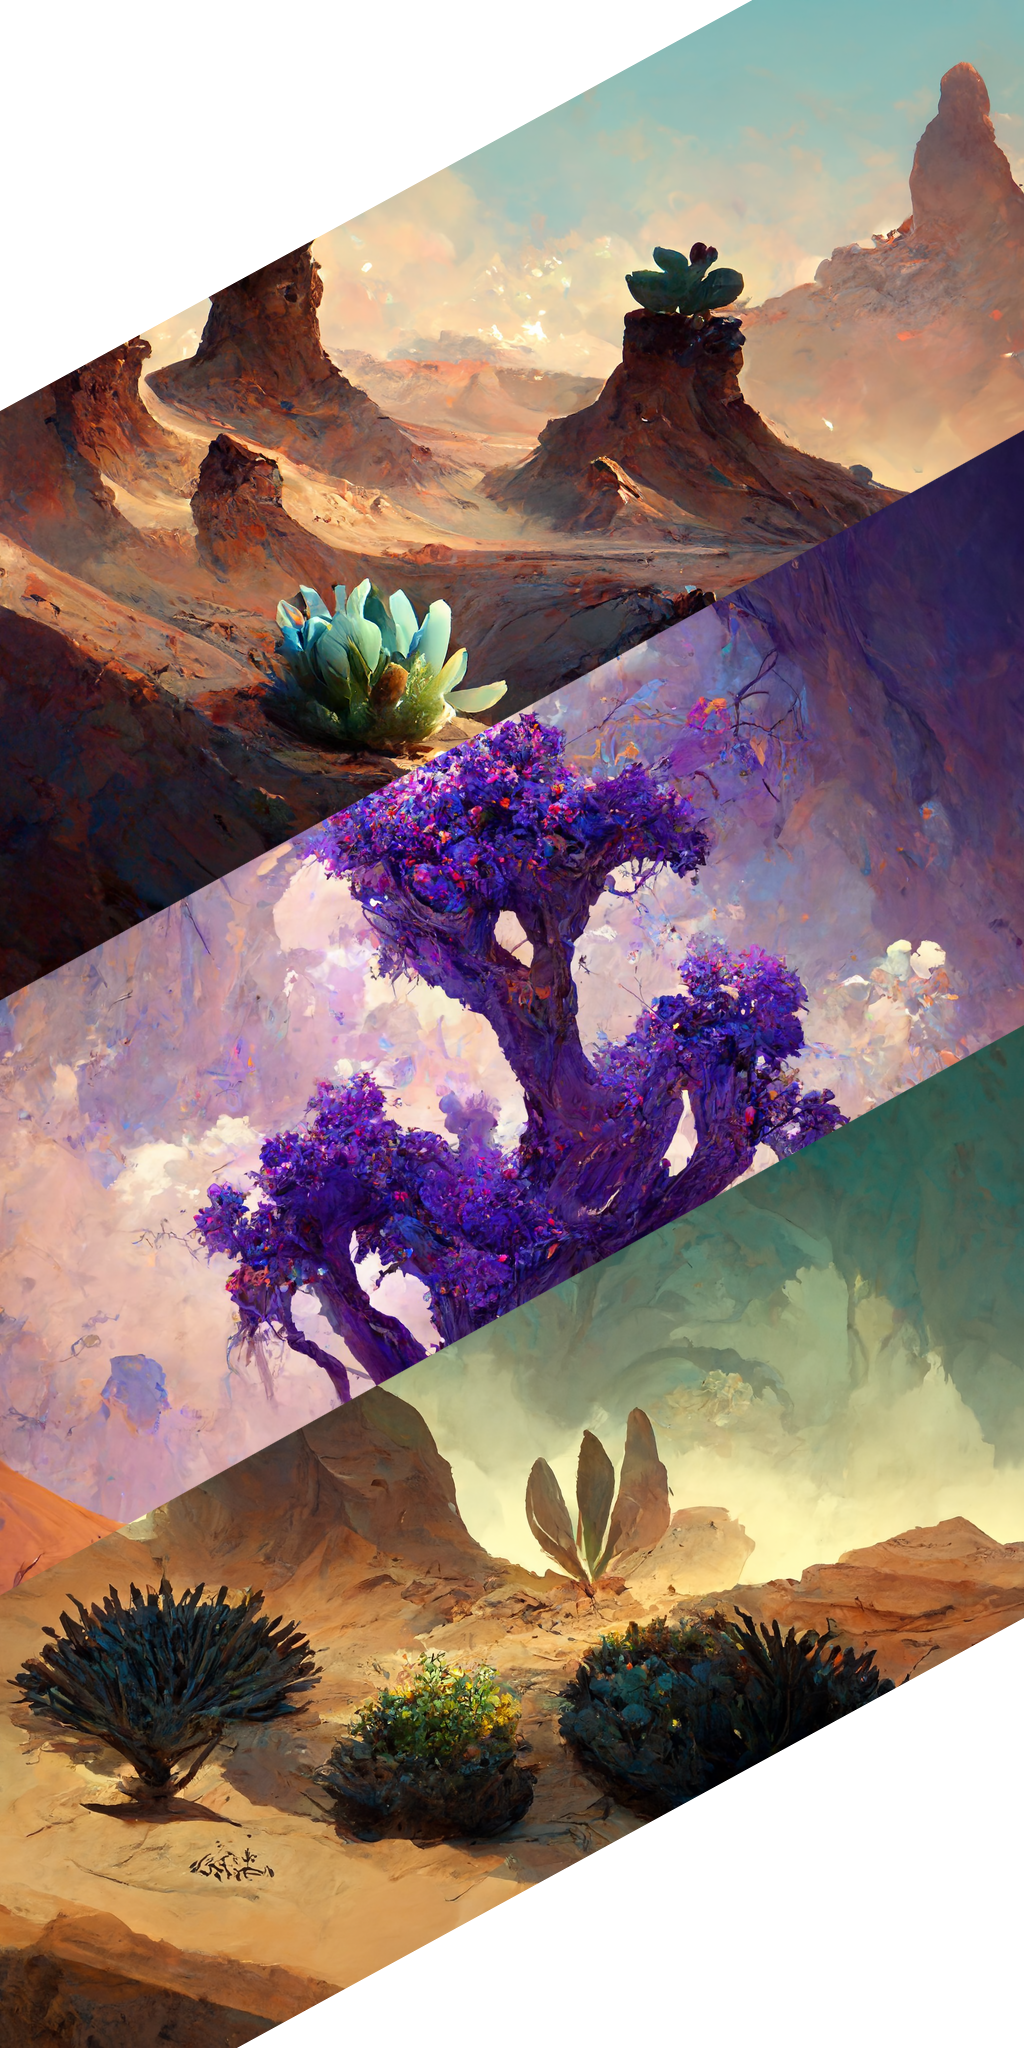 Vertical slices of pictures of succulents, a purple tree, and cactuses.